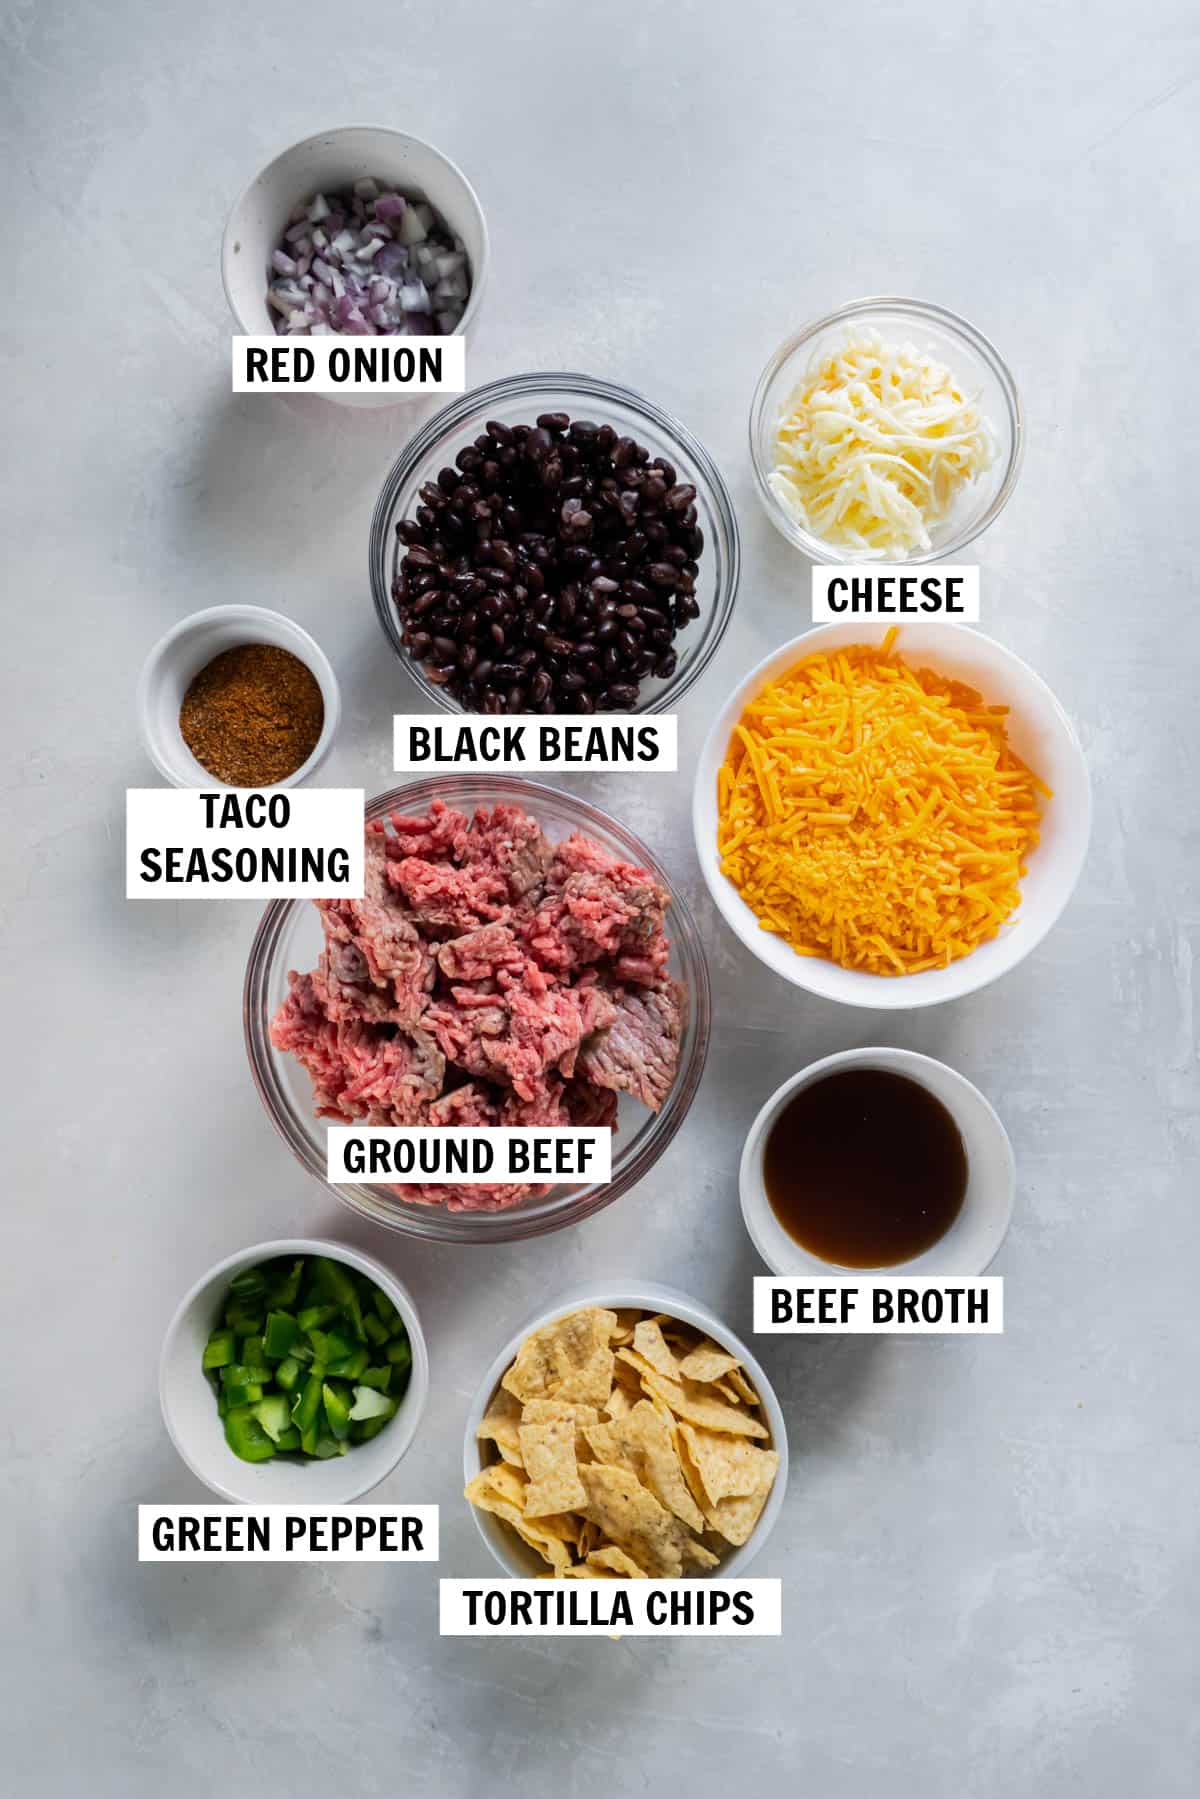 All of the ingredients for taco casserole including ground beef, black beans, cheese, onions, taco seasoning, bell pepper, beef broth and tortilla chips.